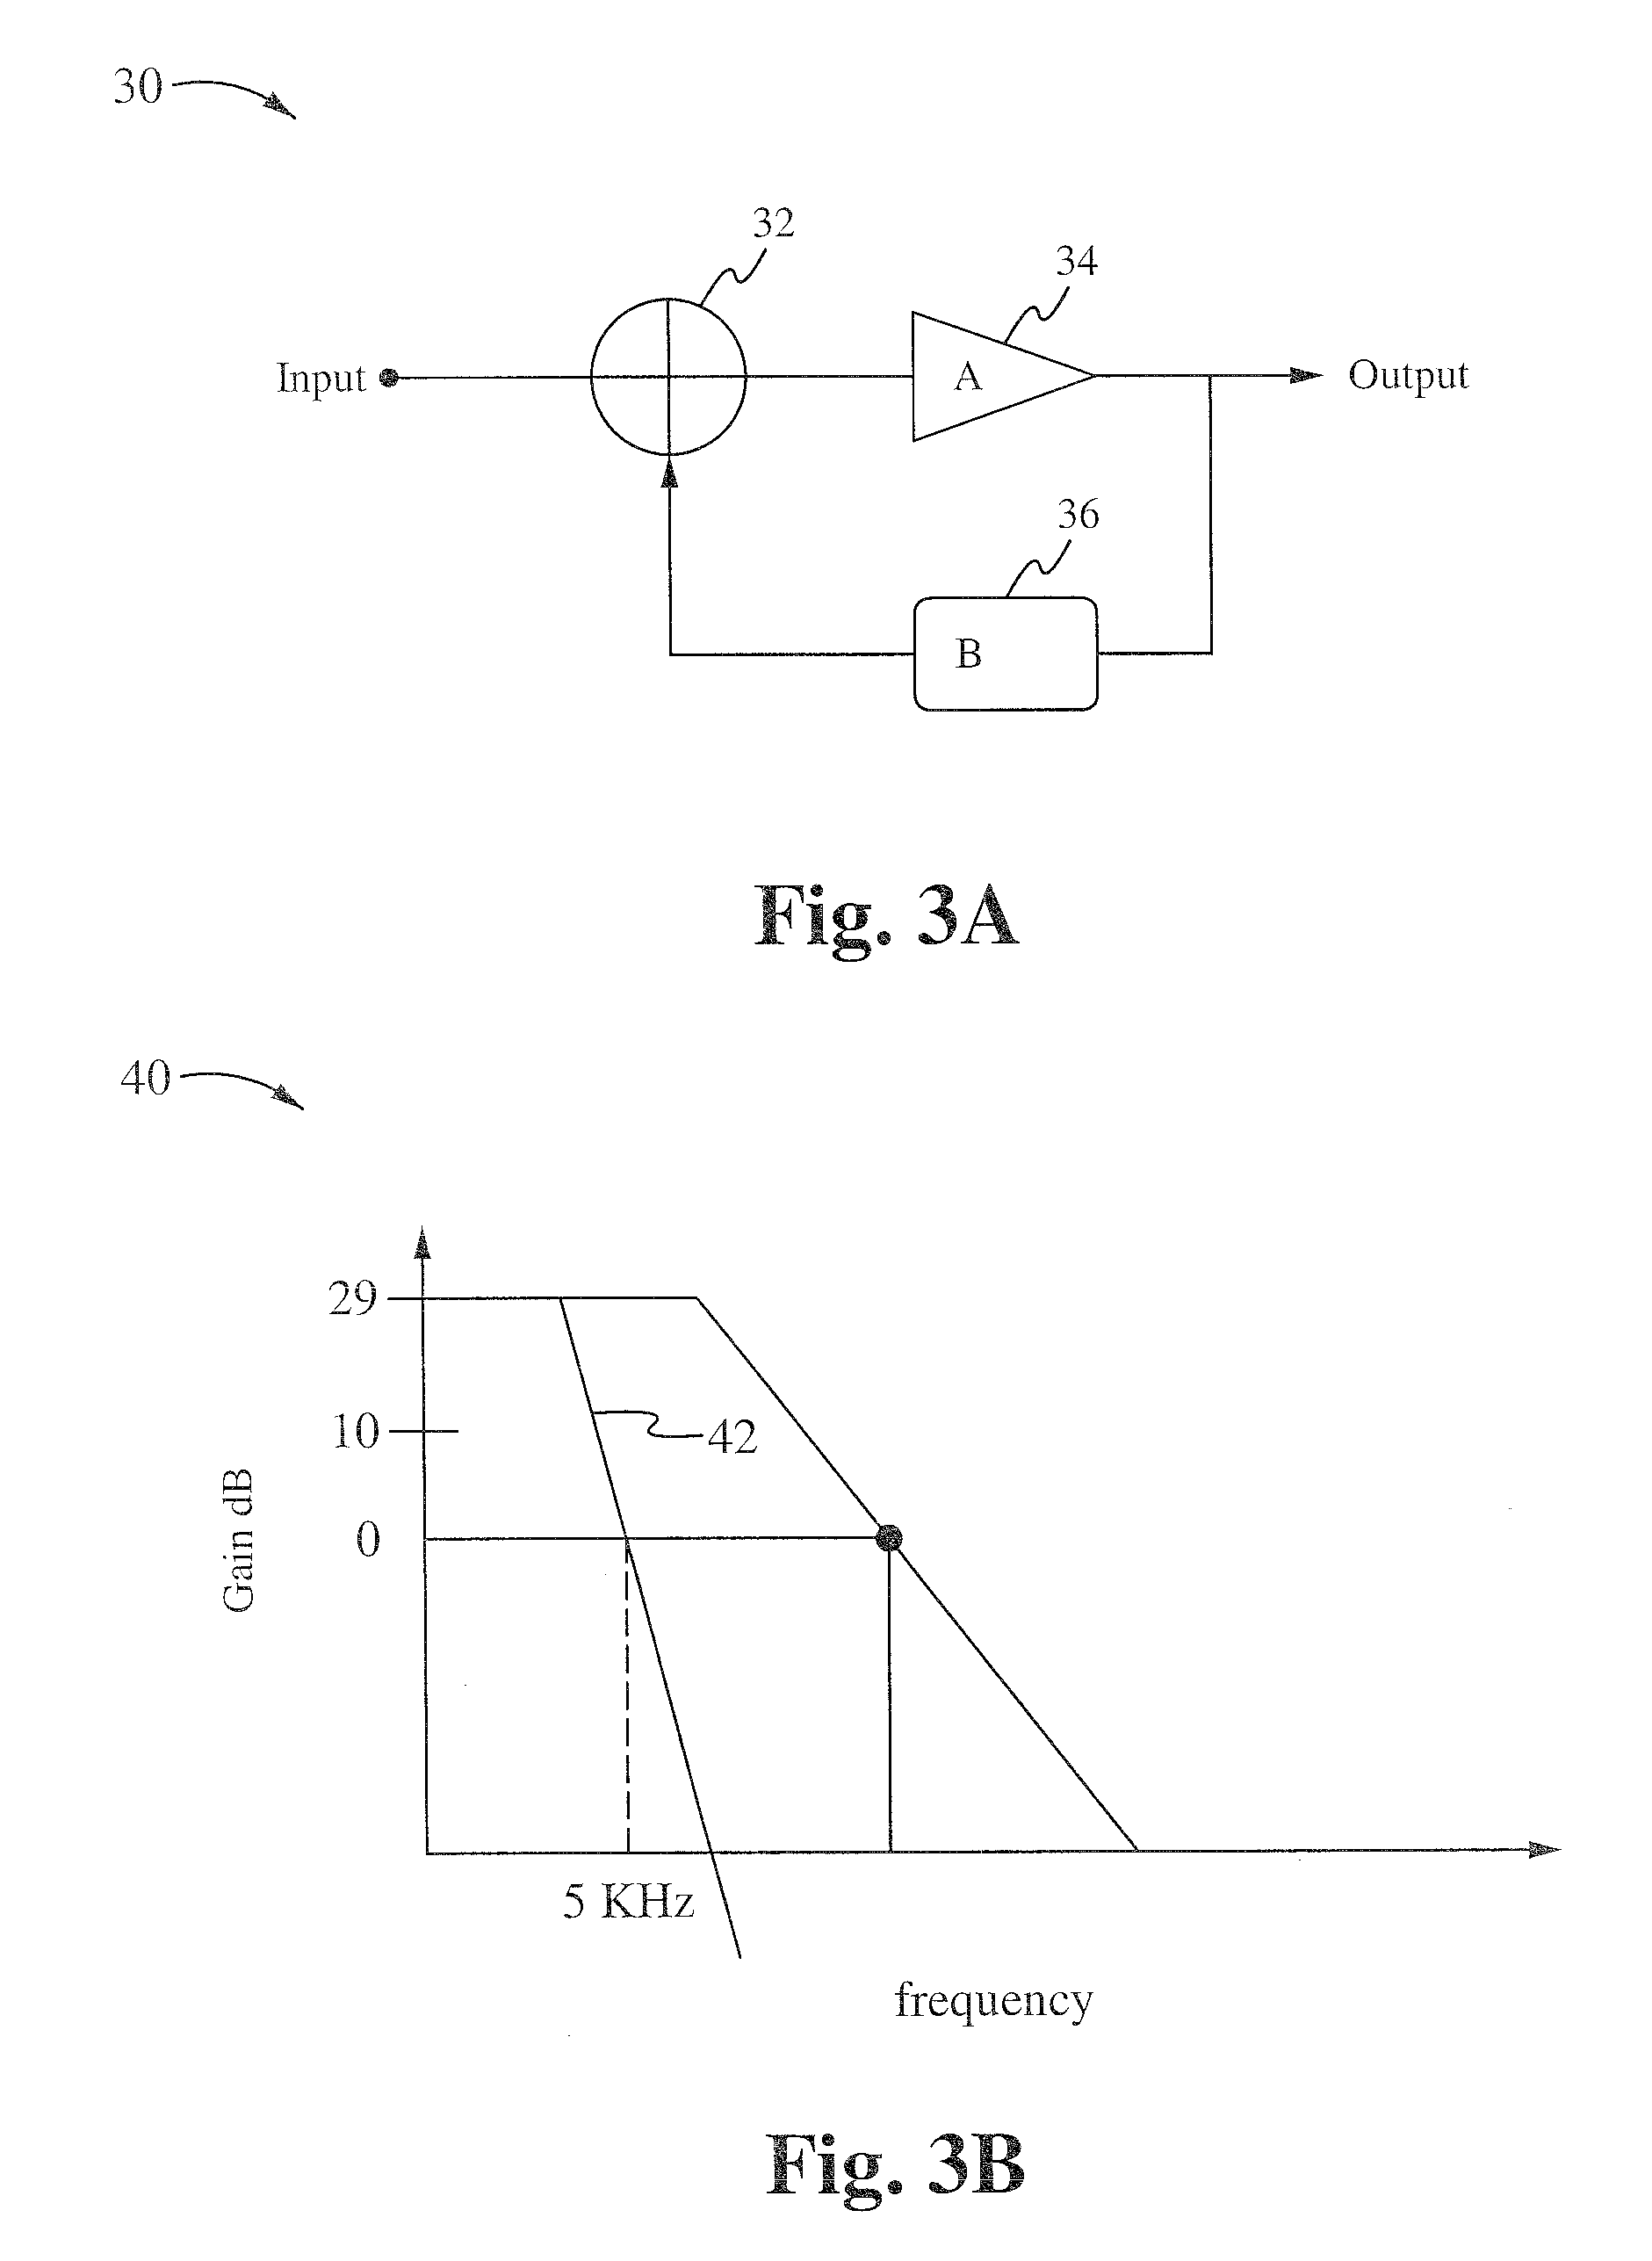 Closed loop negative feedback system with low frequency modulated gain